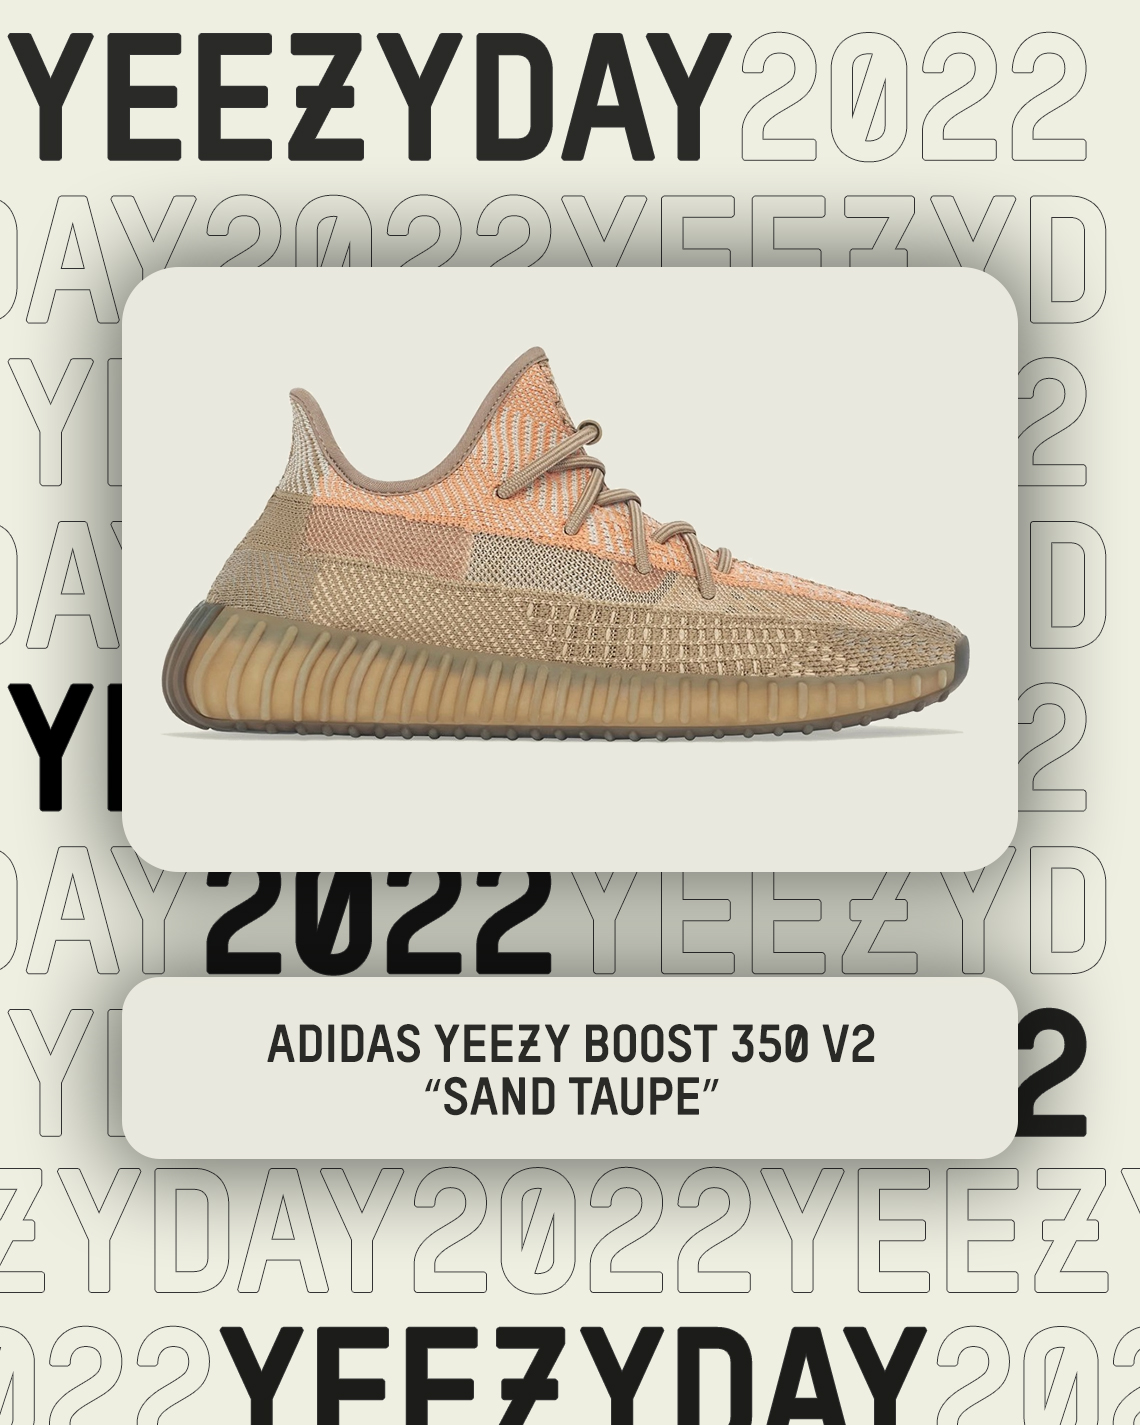 Yeezy Day 2022 Yeezy Boost 350 V2 Sand Taupe